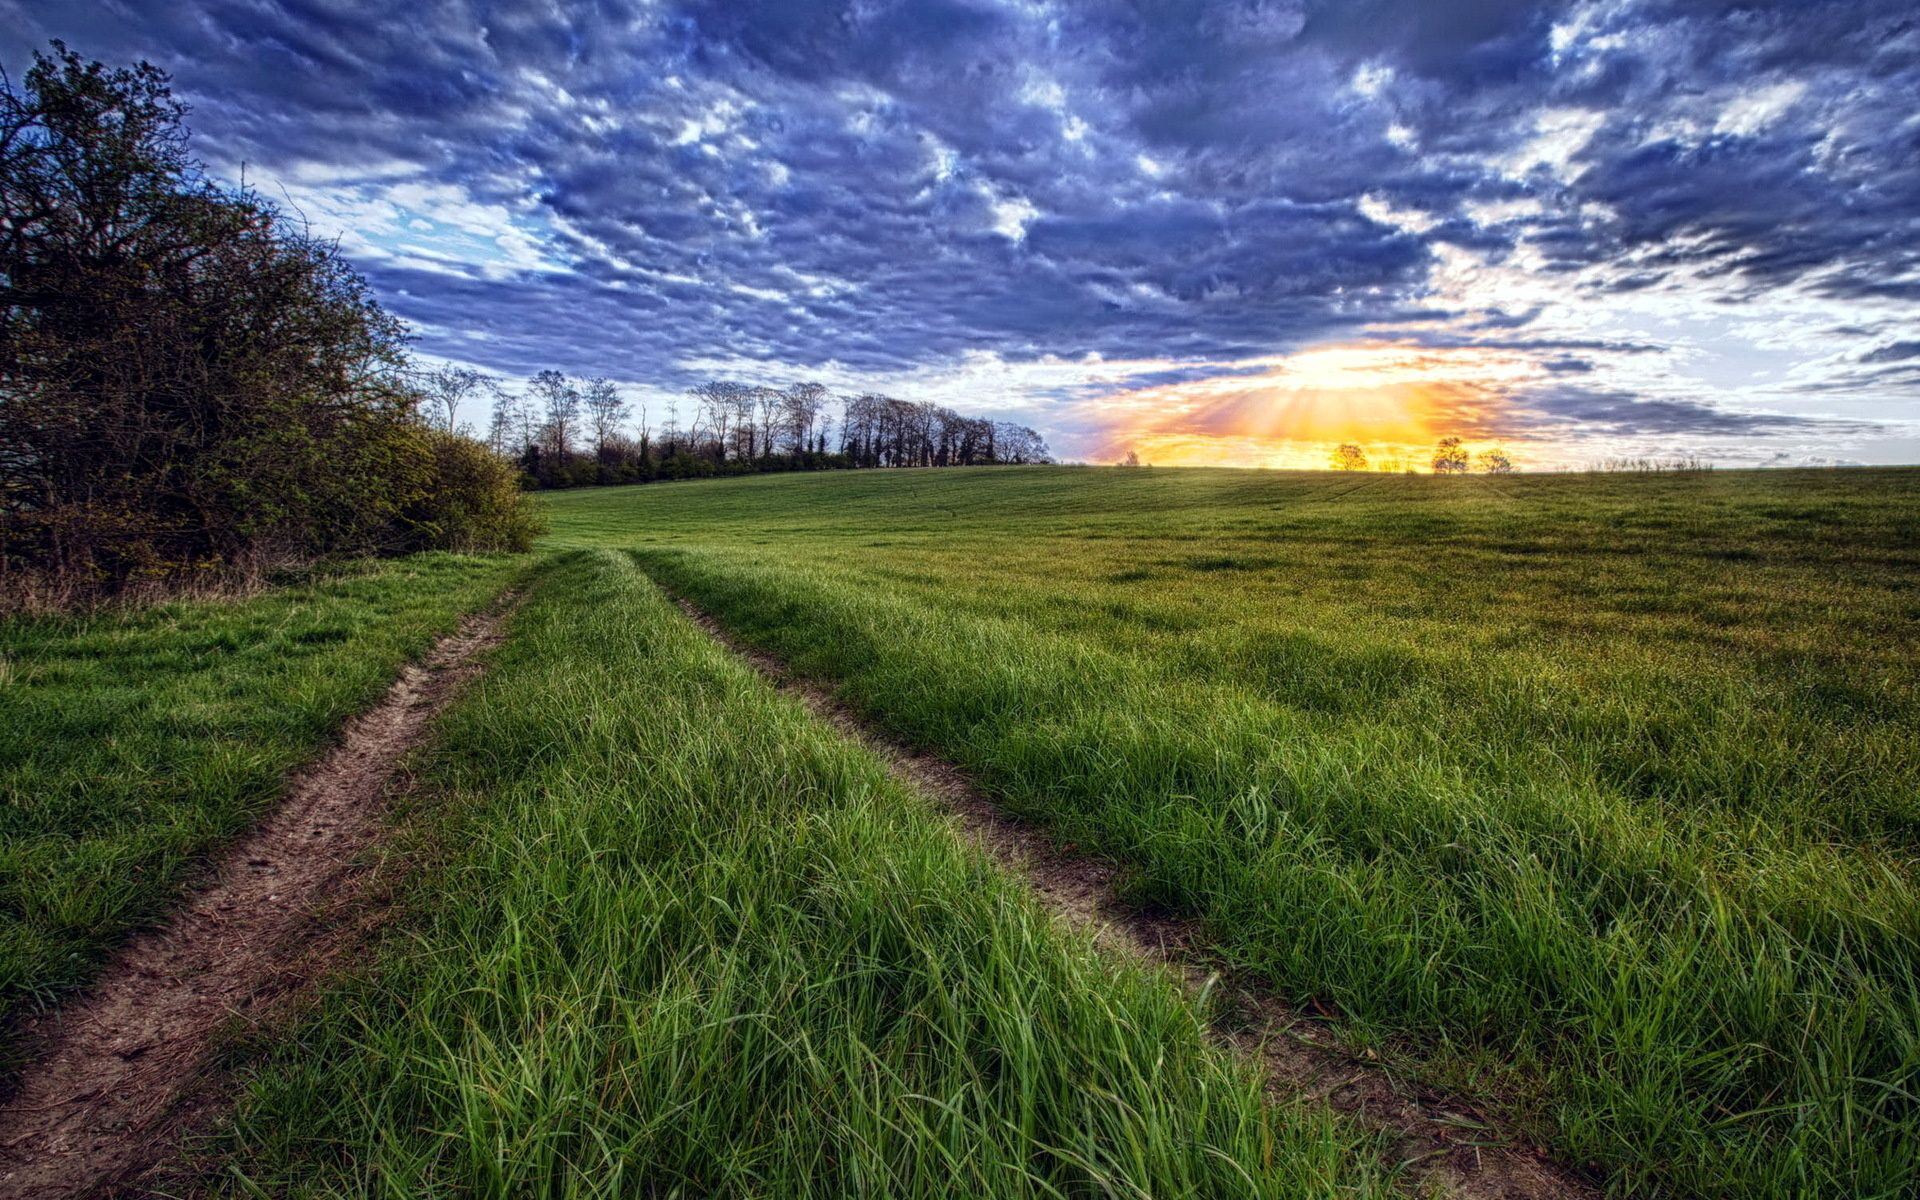 beams, layers, nature, grass, sun, clouds, orange, shine, light, rays, road, field, evening, traces wallpapers for tablet